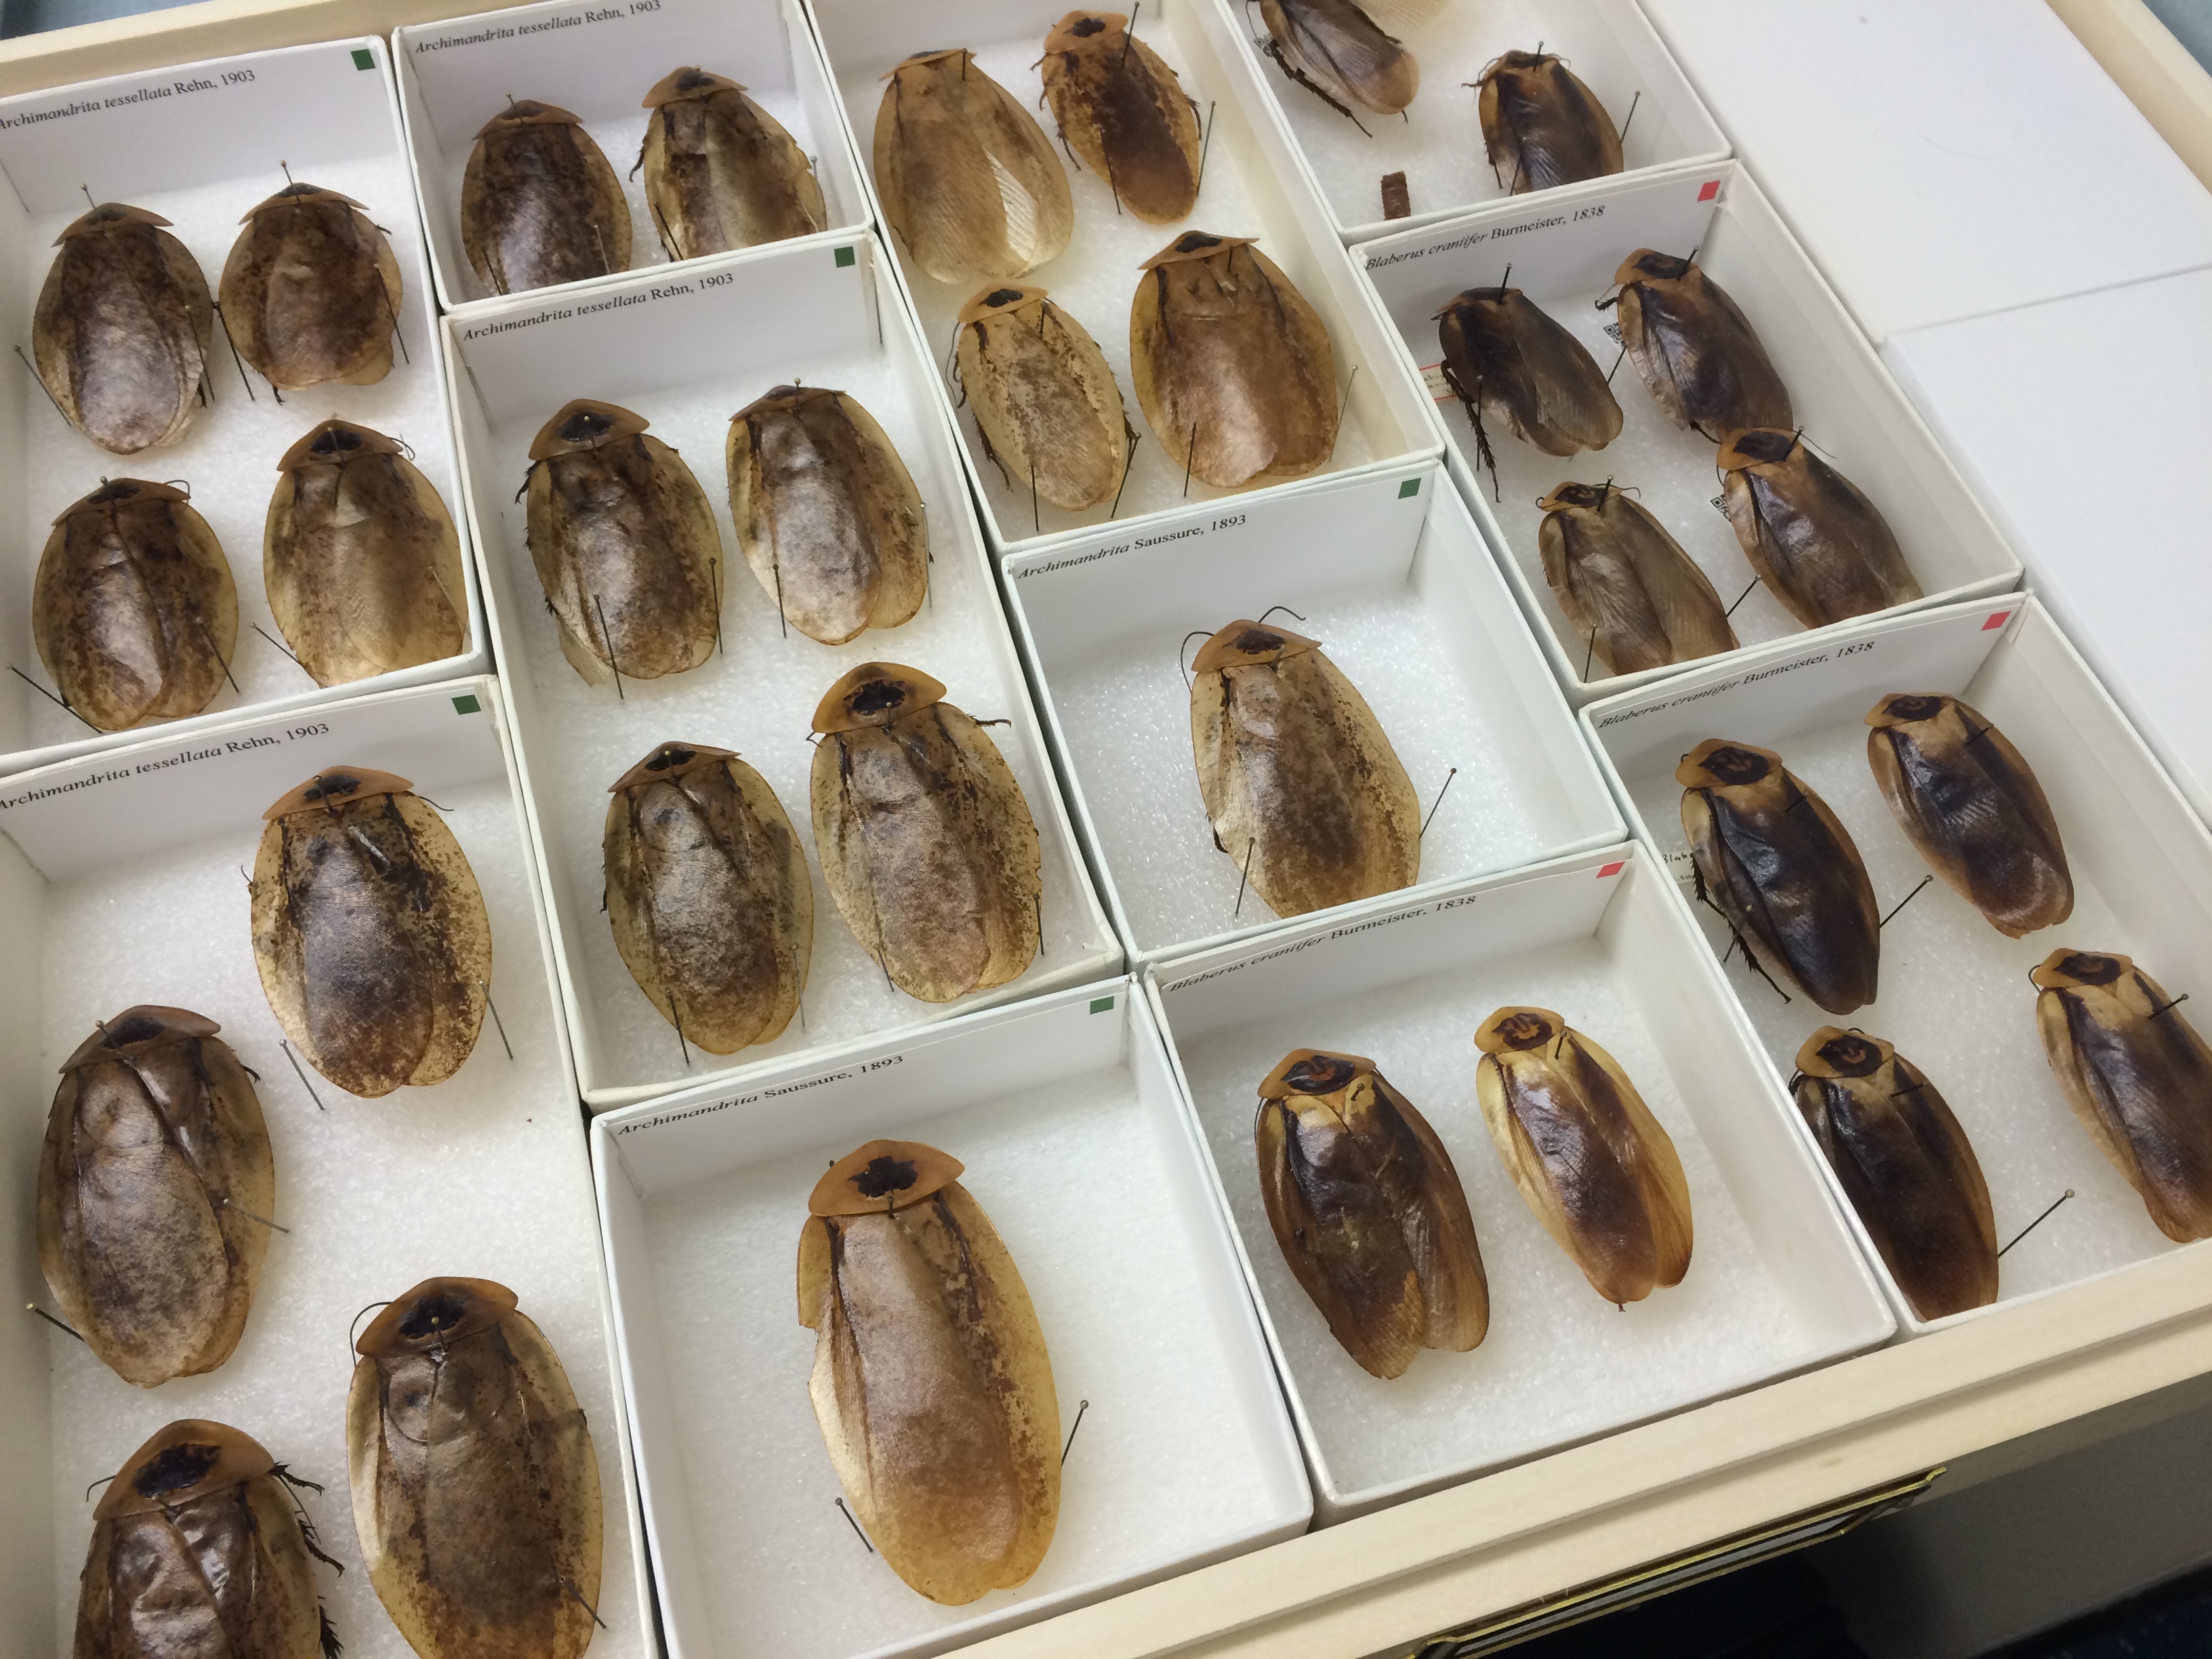 Rows of tan and brown cockroach specimens pinned in white boxes.